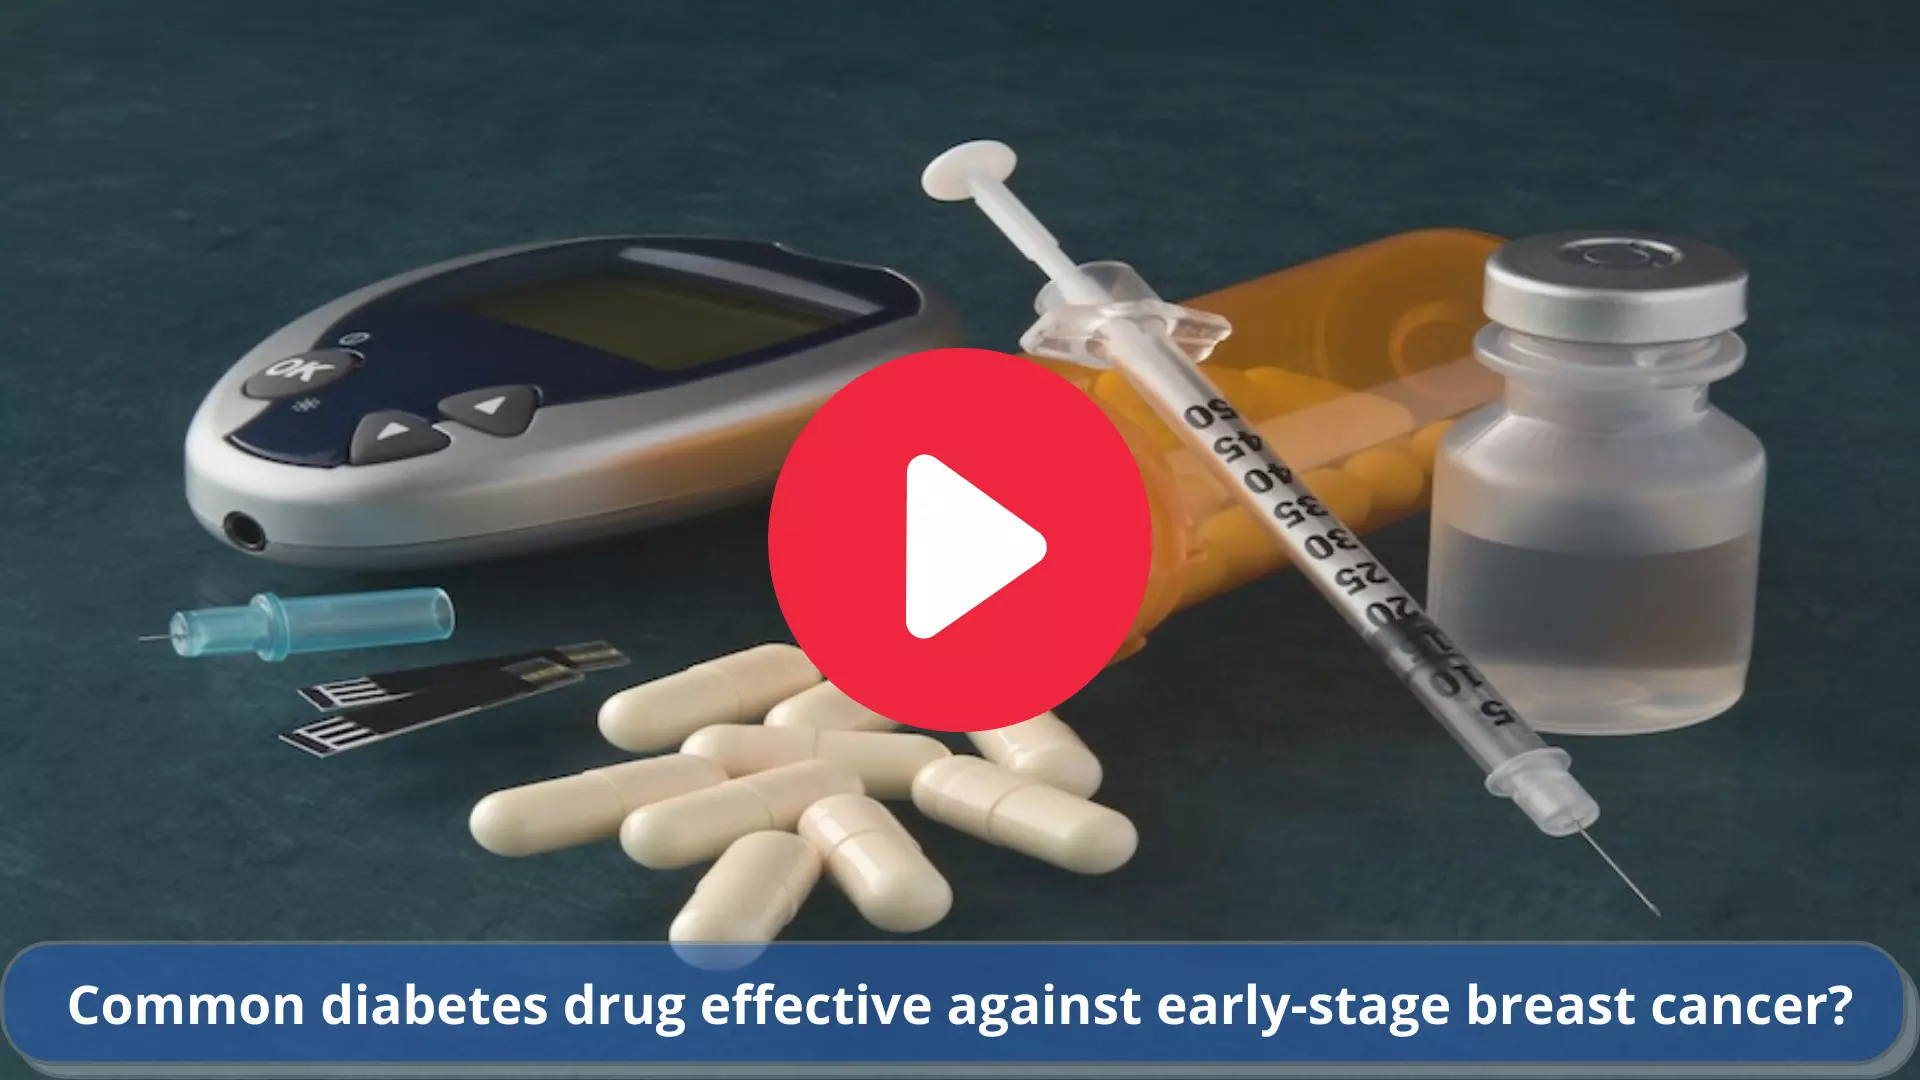 Common diabetes drug effective against early-stage breast cancer?